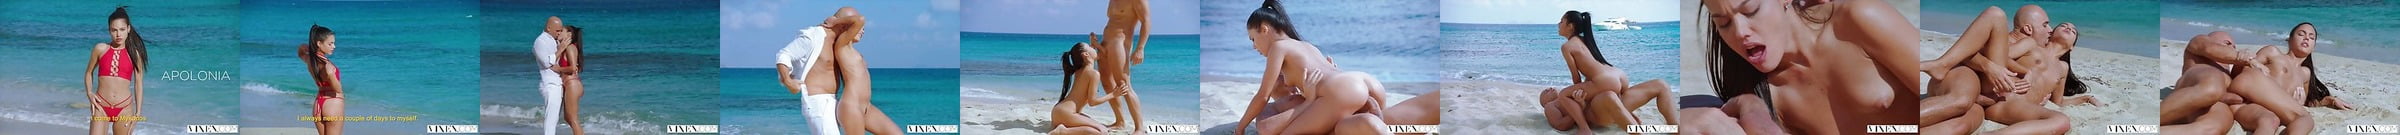 Vixen Model Has Incredible Passionate Sex On The Beach Jp